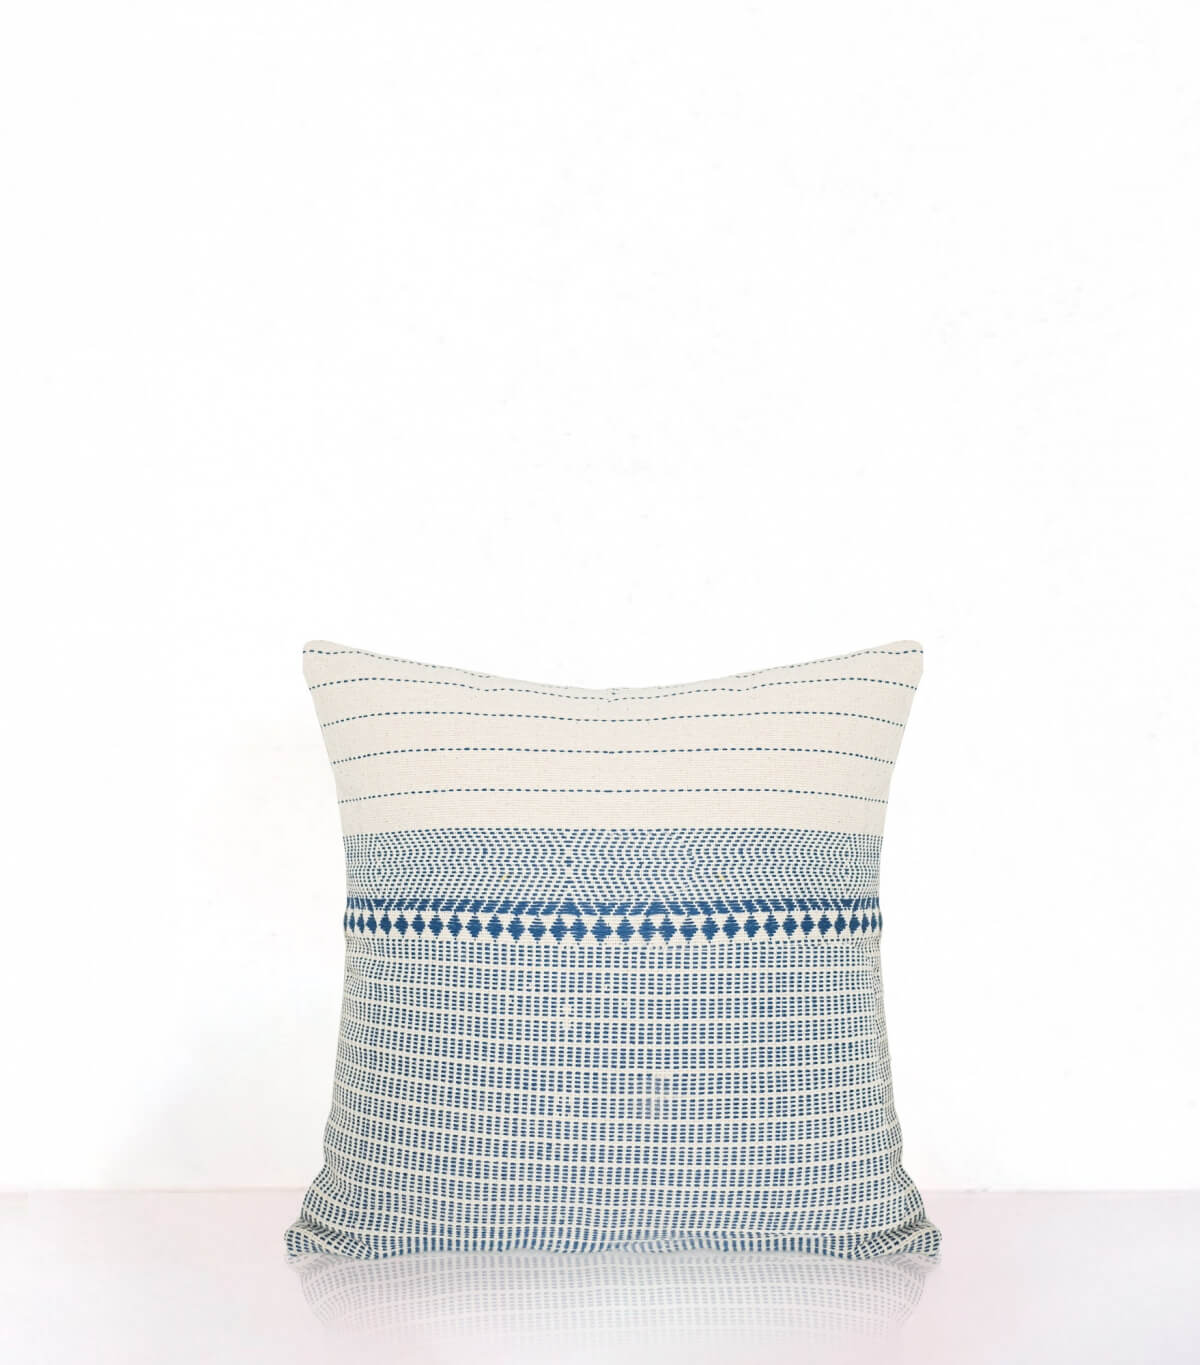 Indian cushion cover 16x16 inches - blue